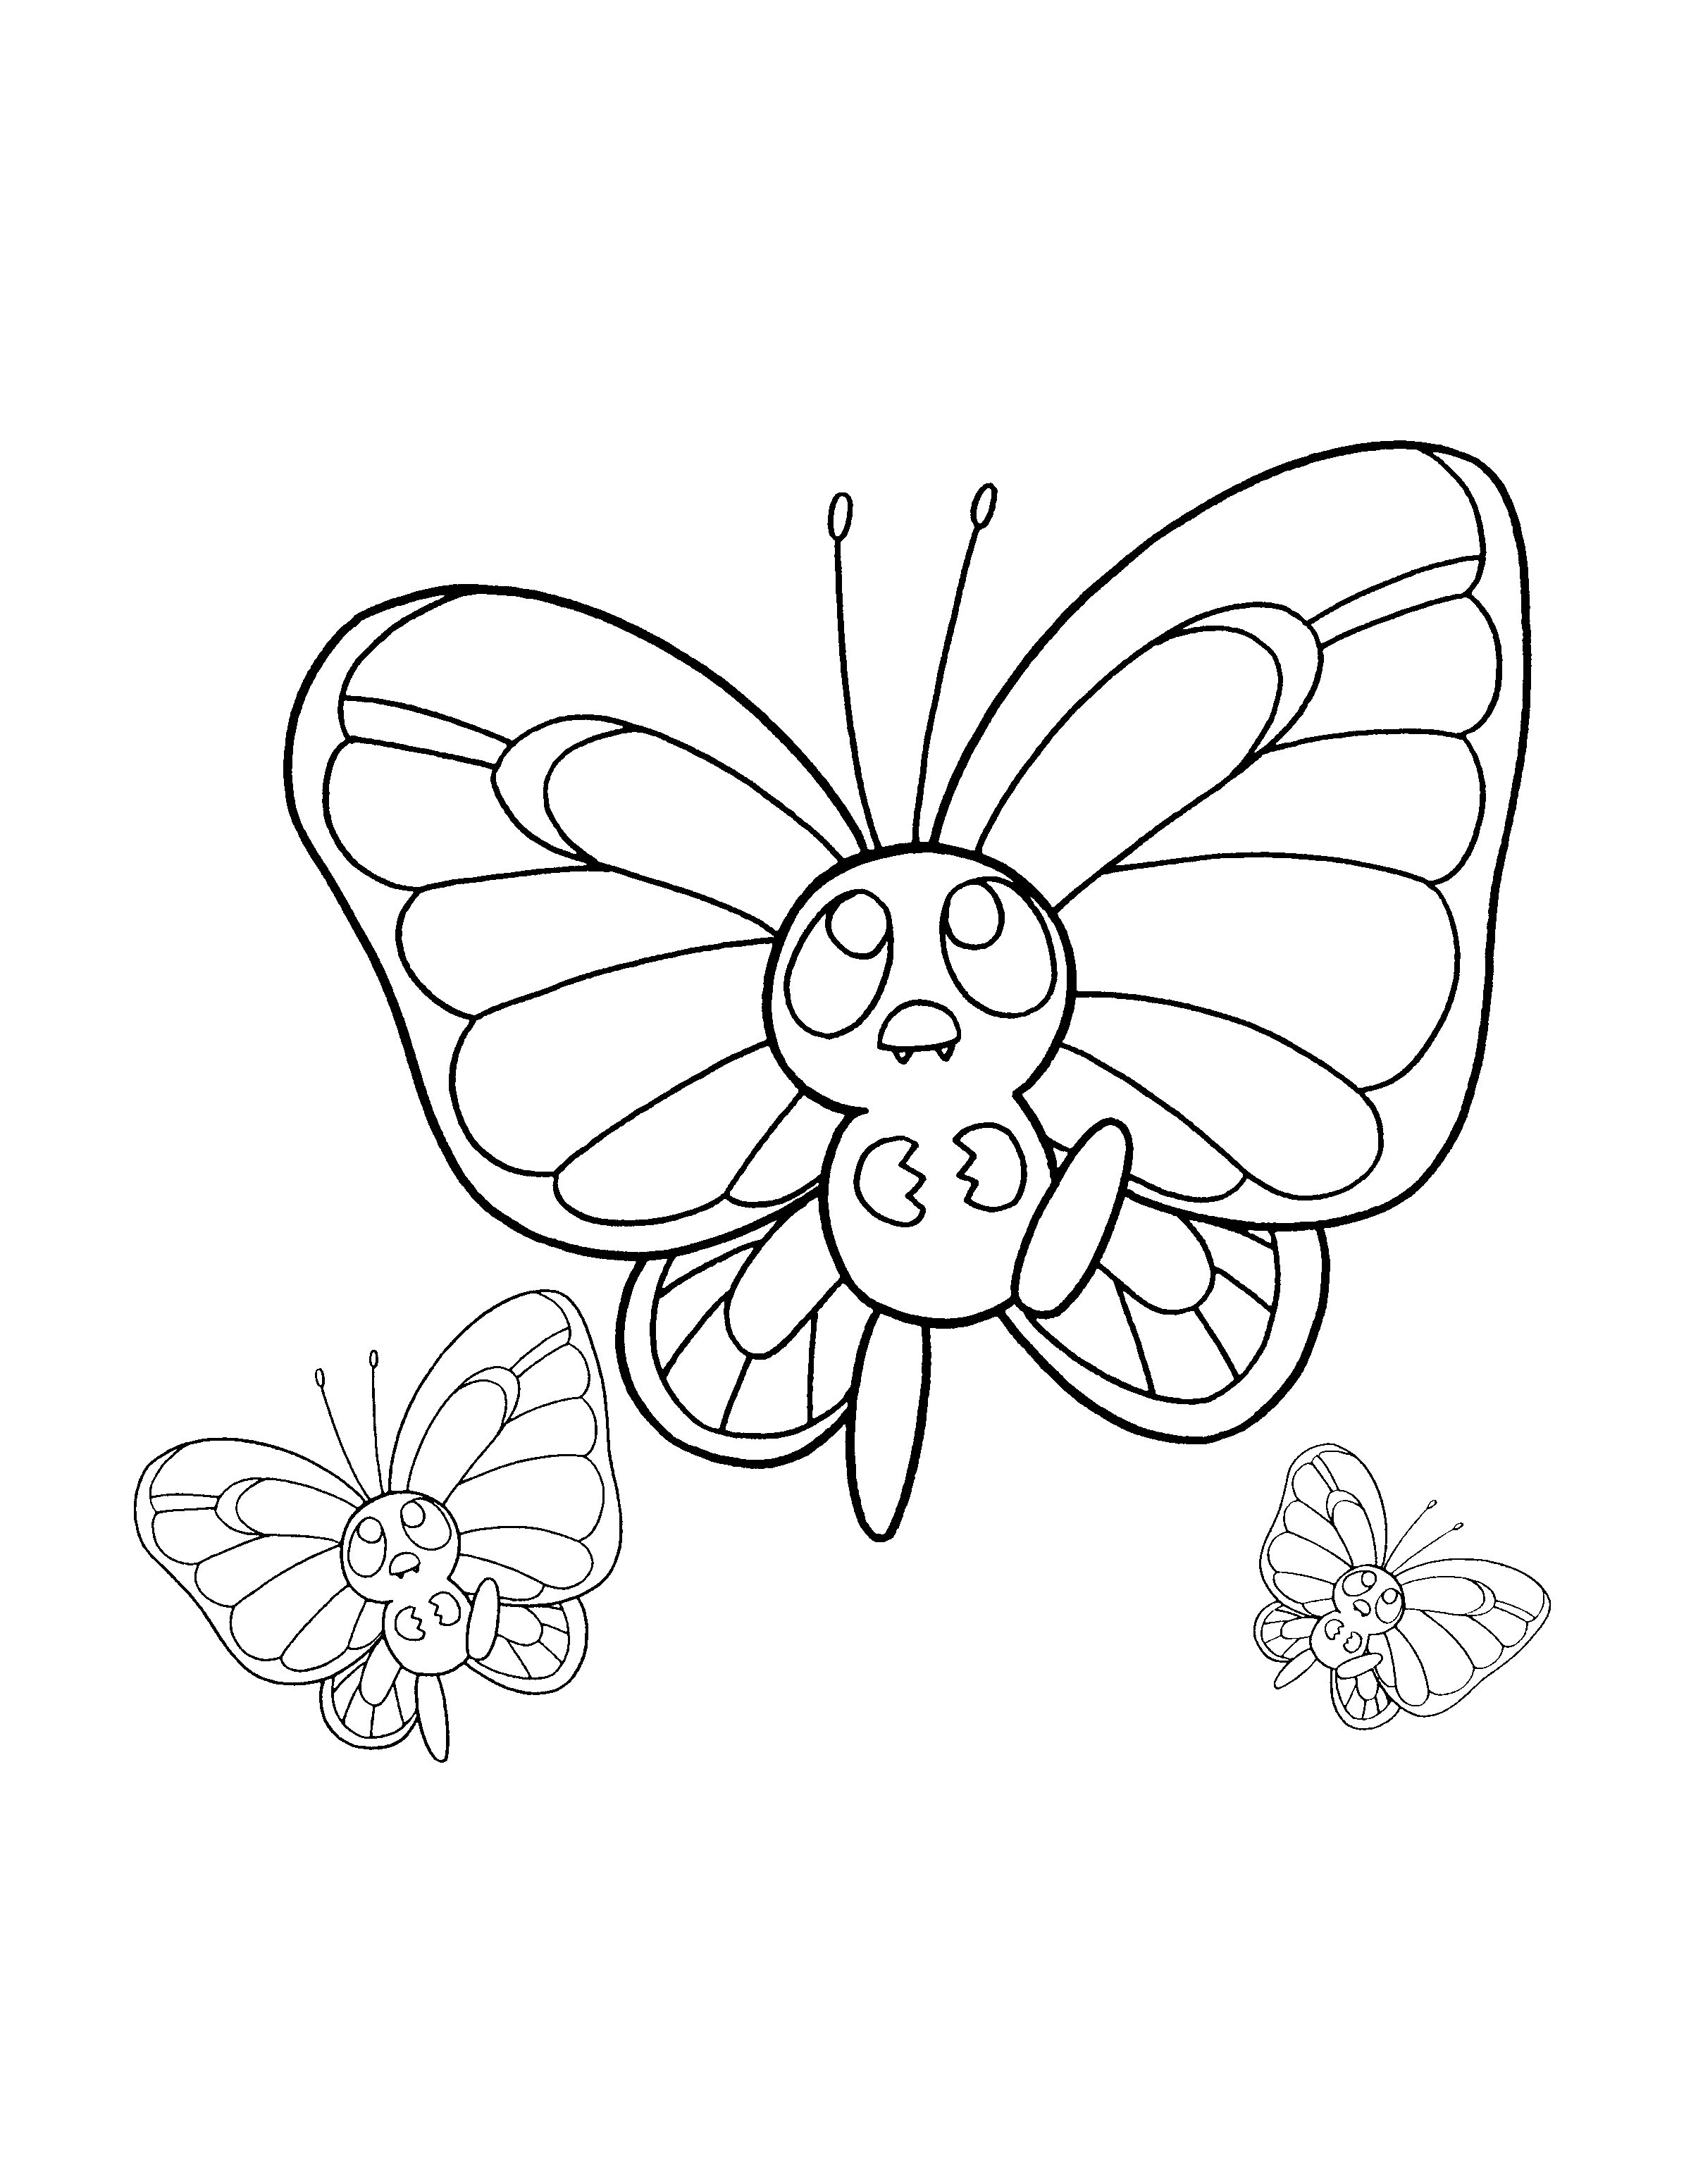 animated-coloring-pages-pokemon-image-0718